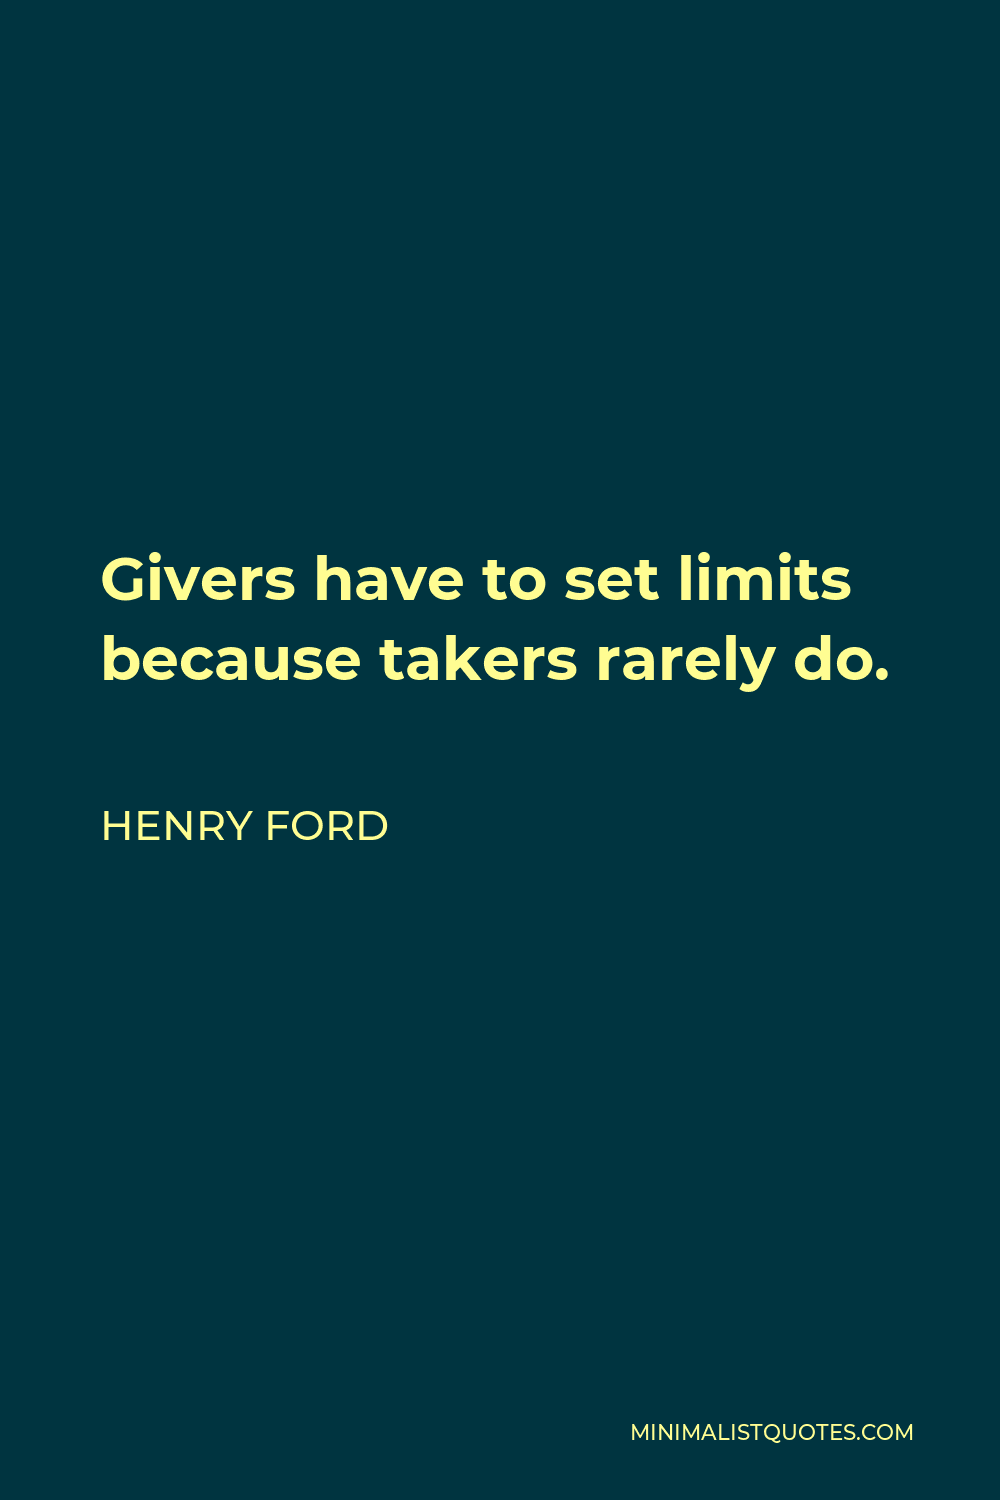 Henry Ford Quote - Givers have to set limits because takers rarely do.